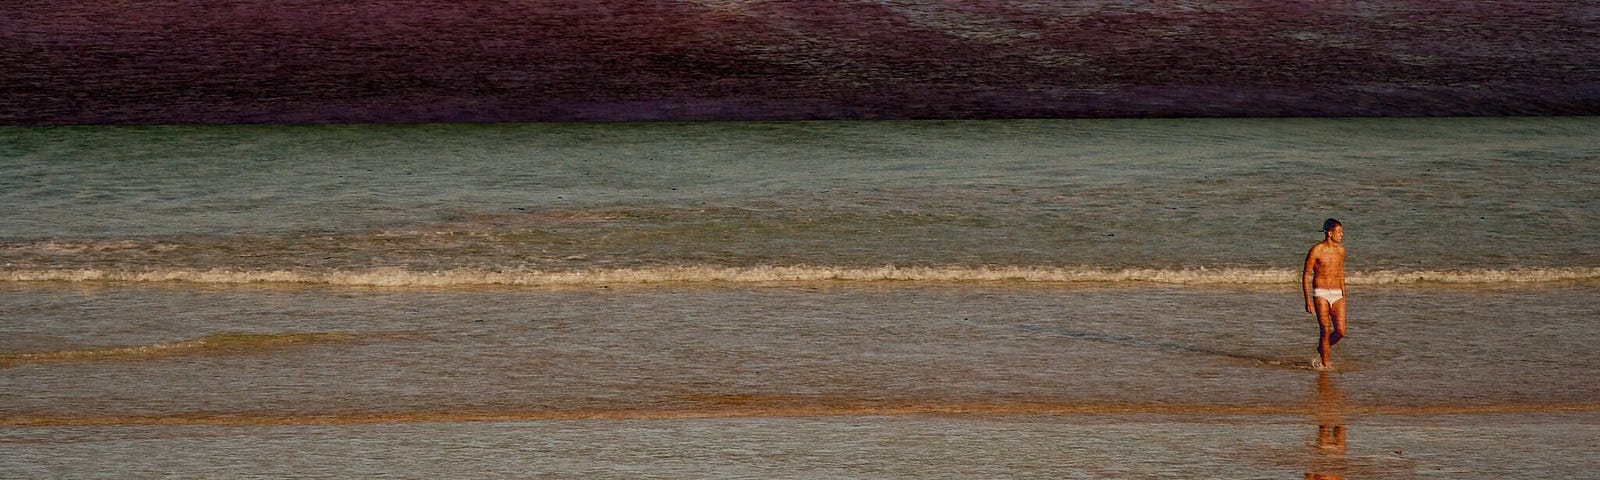 A photo of a man walking on the beach. The sky is dark with red clouds.